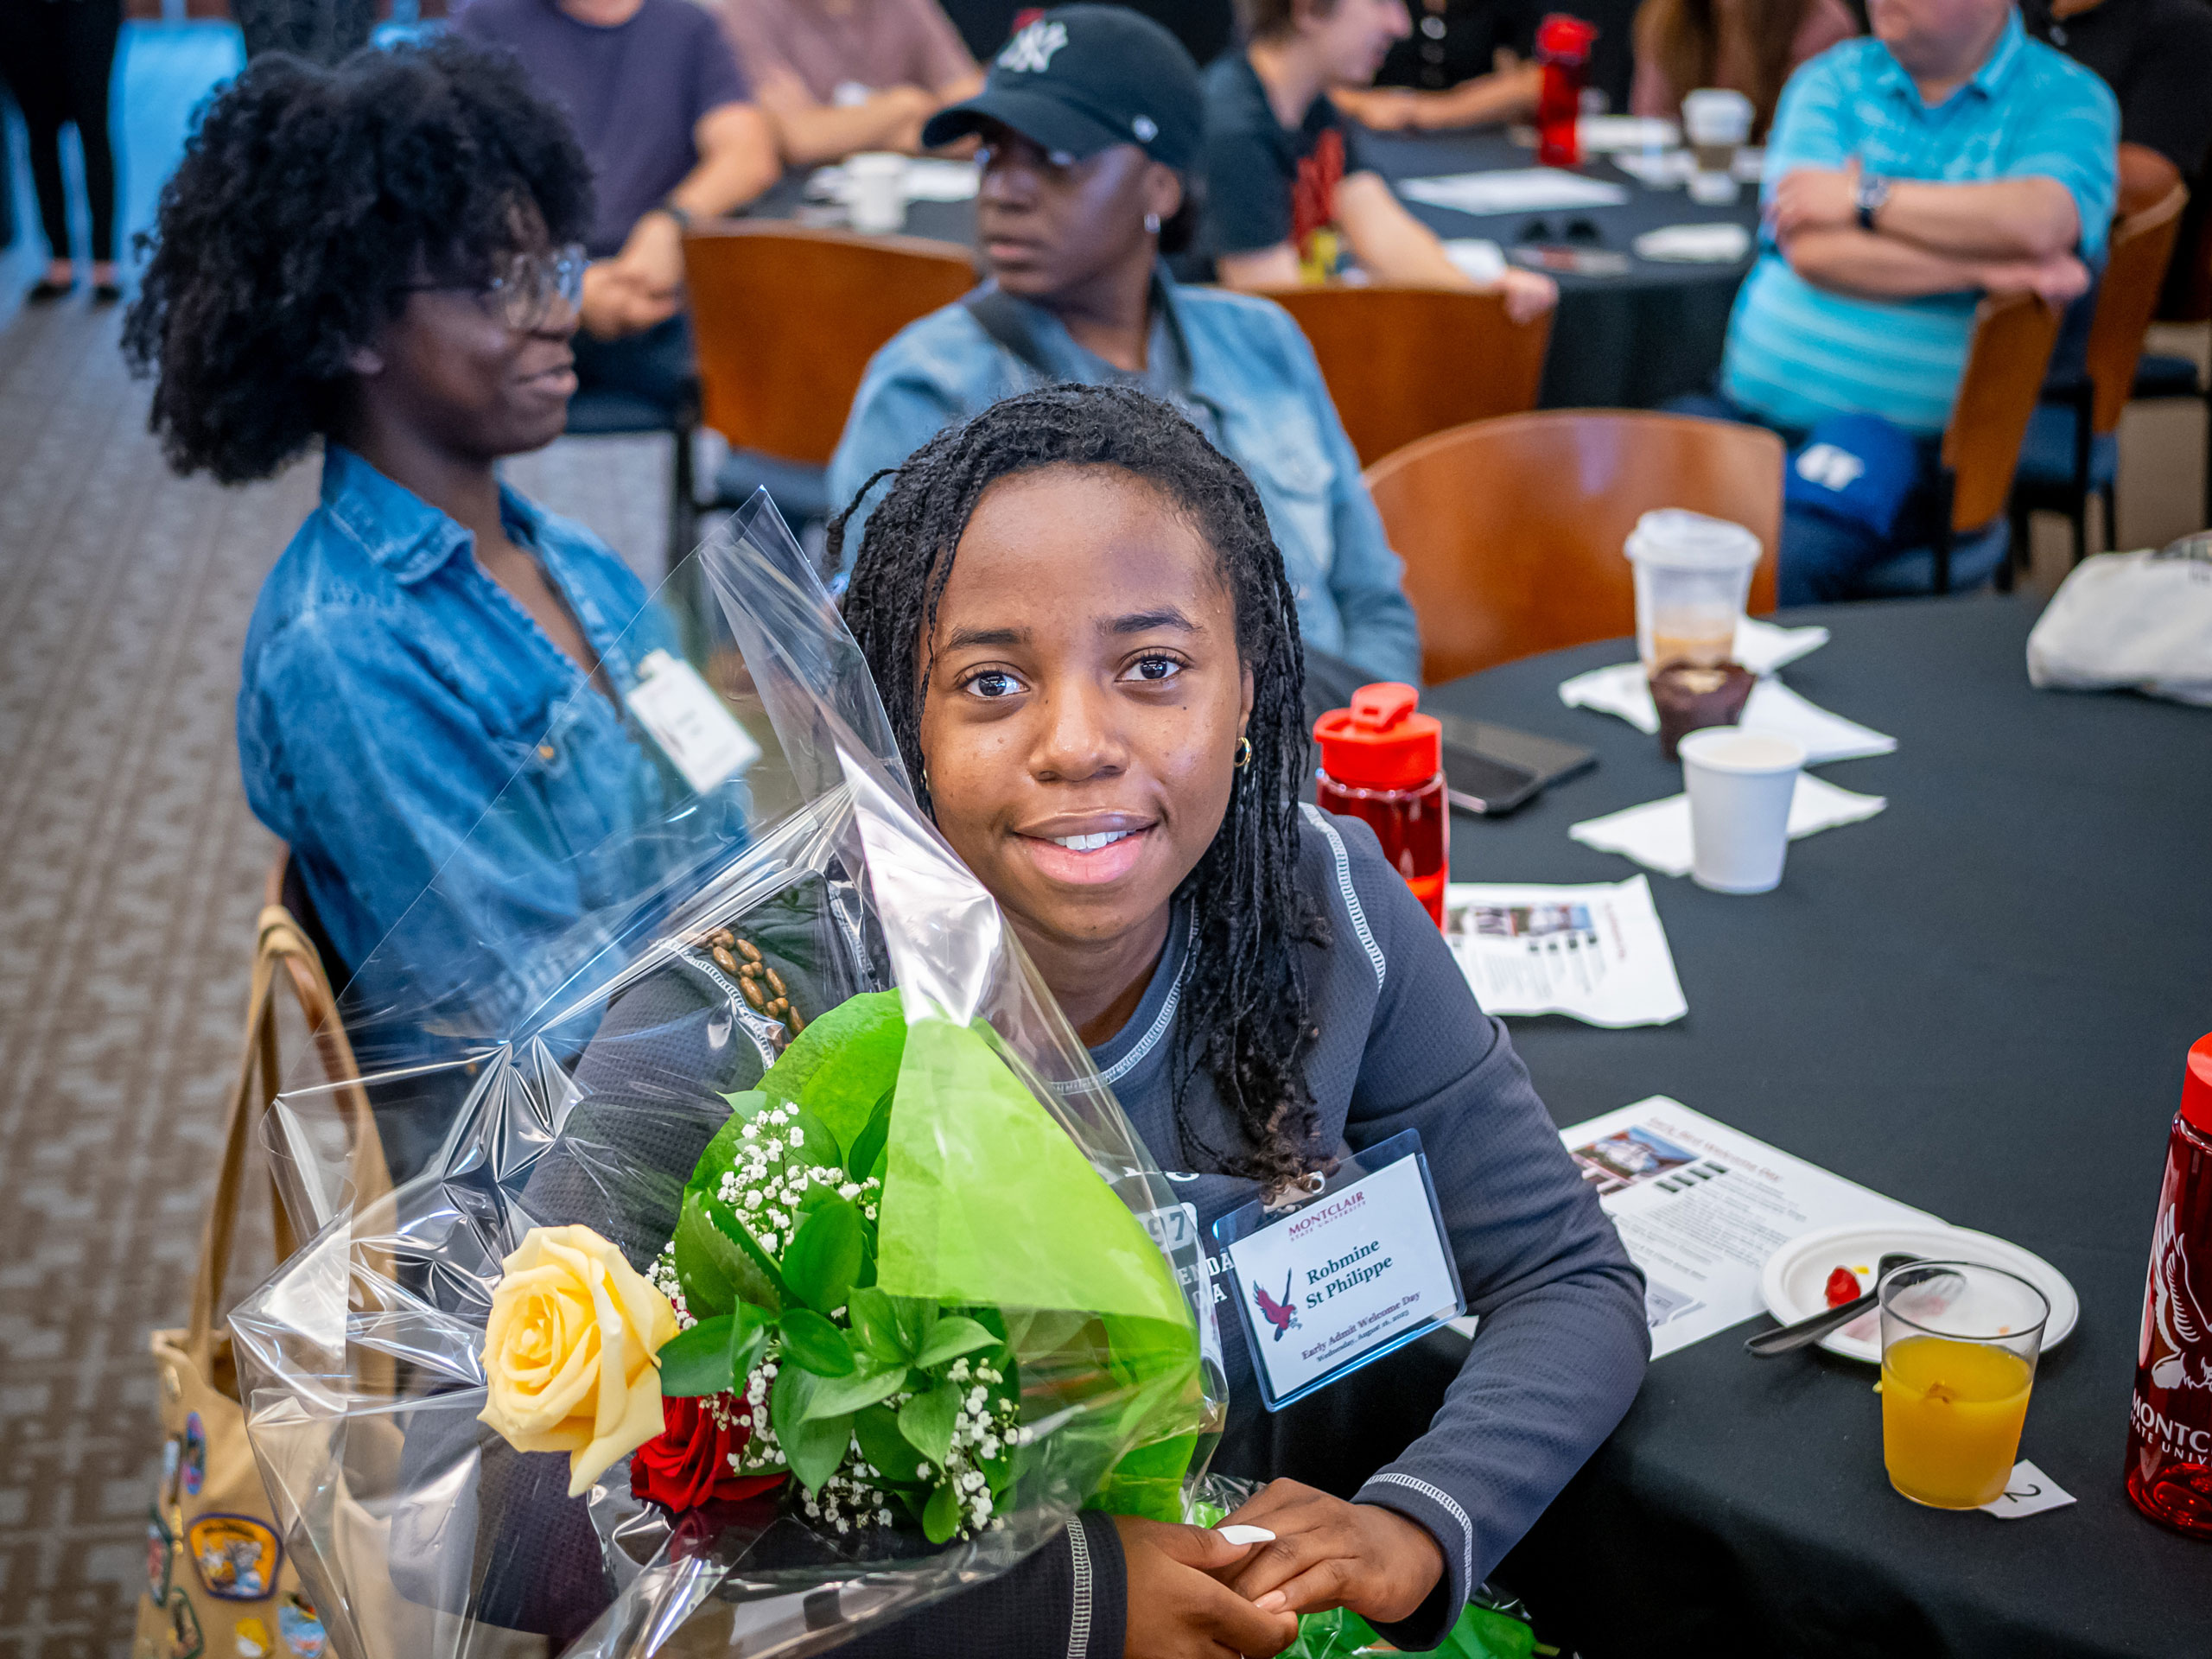 A student holds a bouquet of roses while seated at a table.